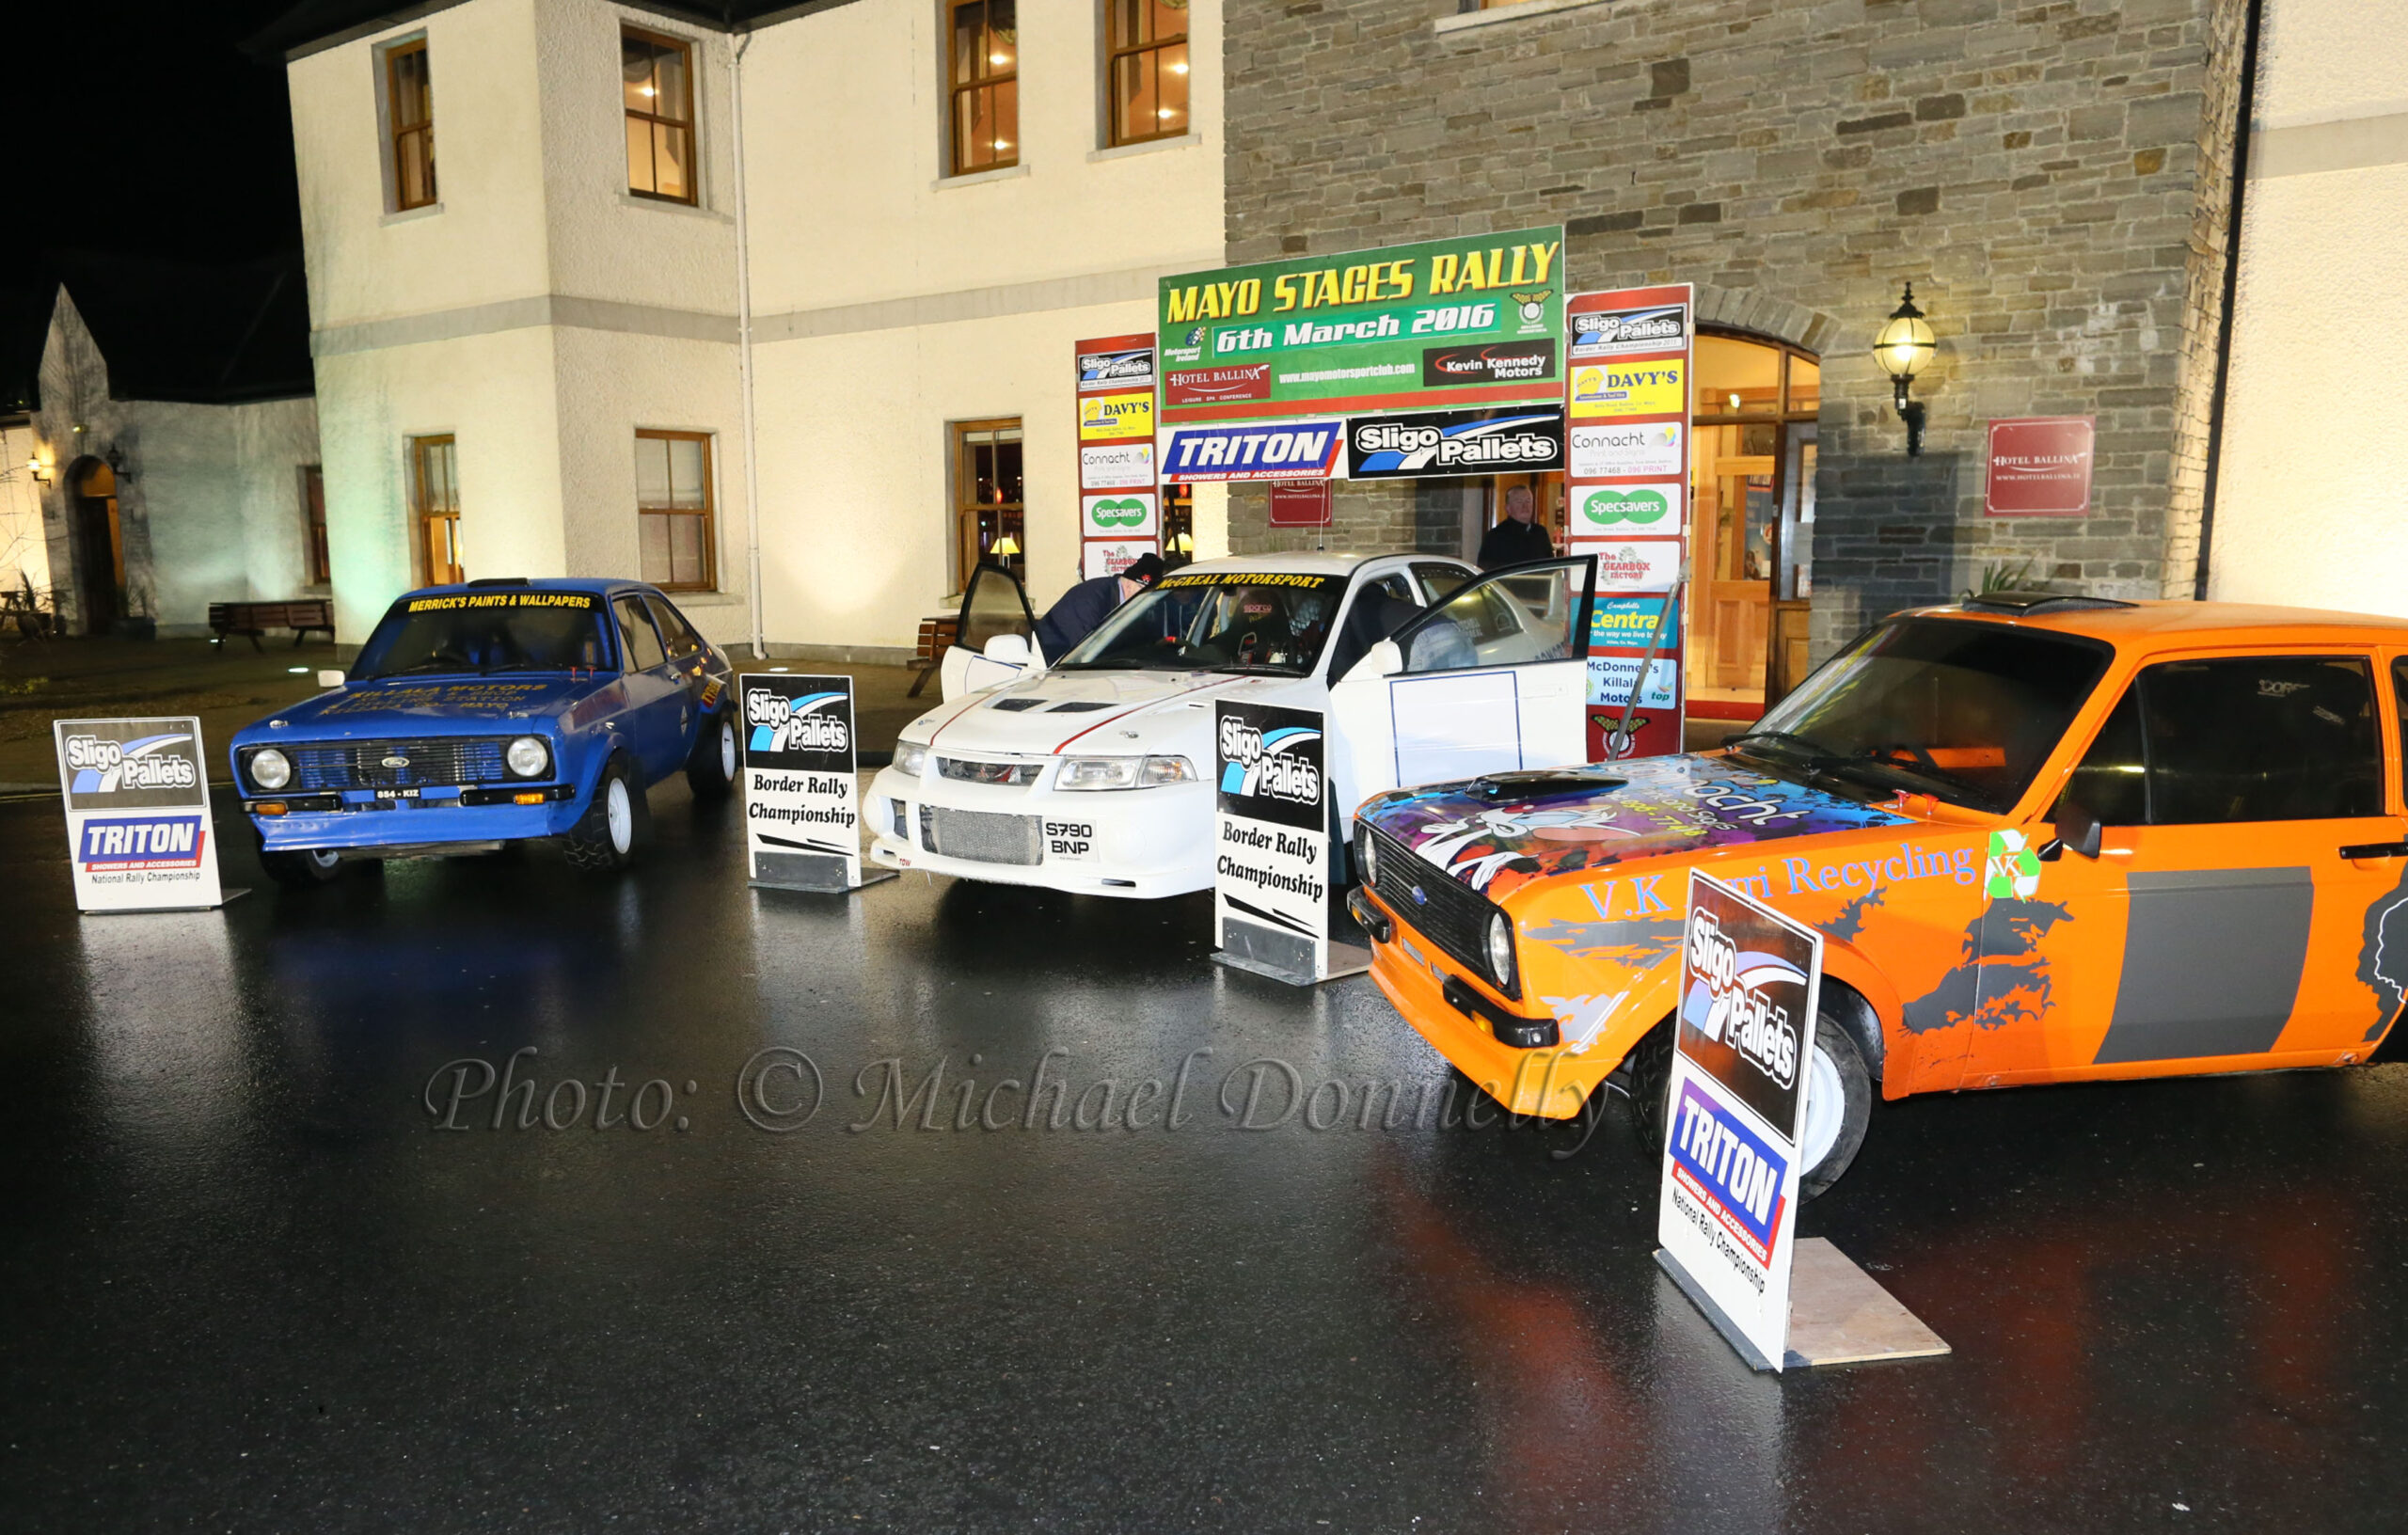 <span class="light">Mayo</span> Stages Rally Launch at Hotel Ballina